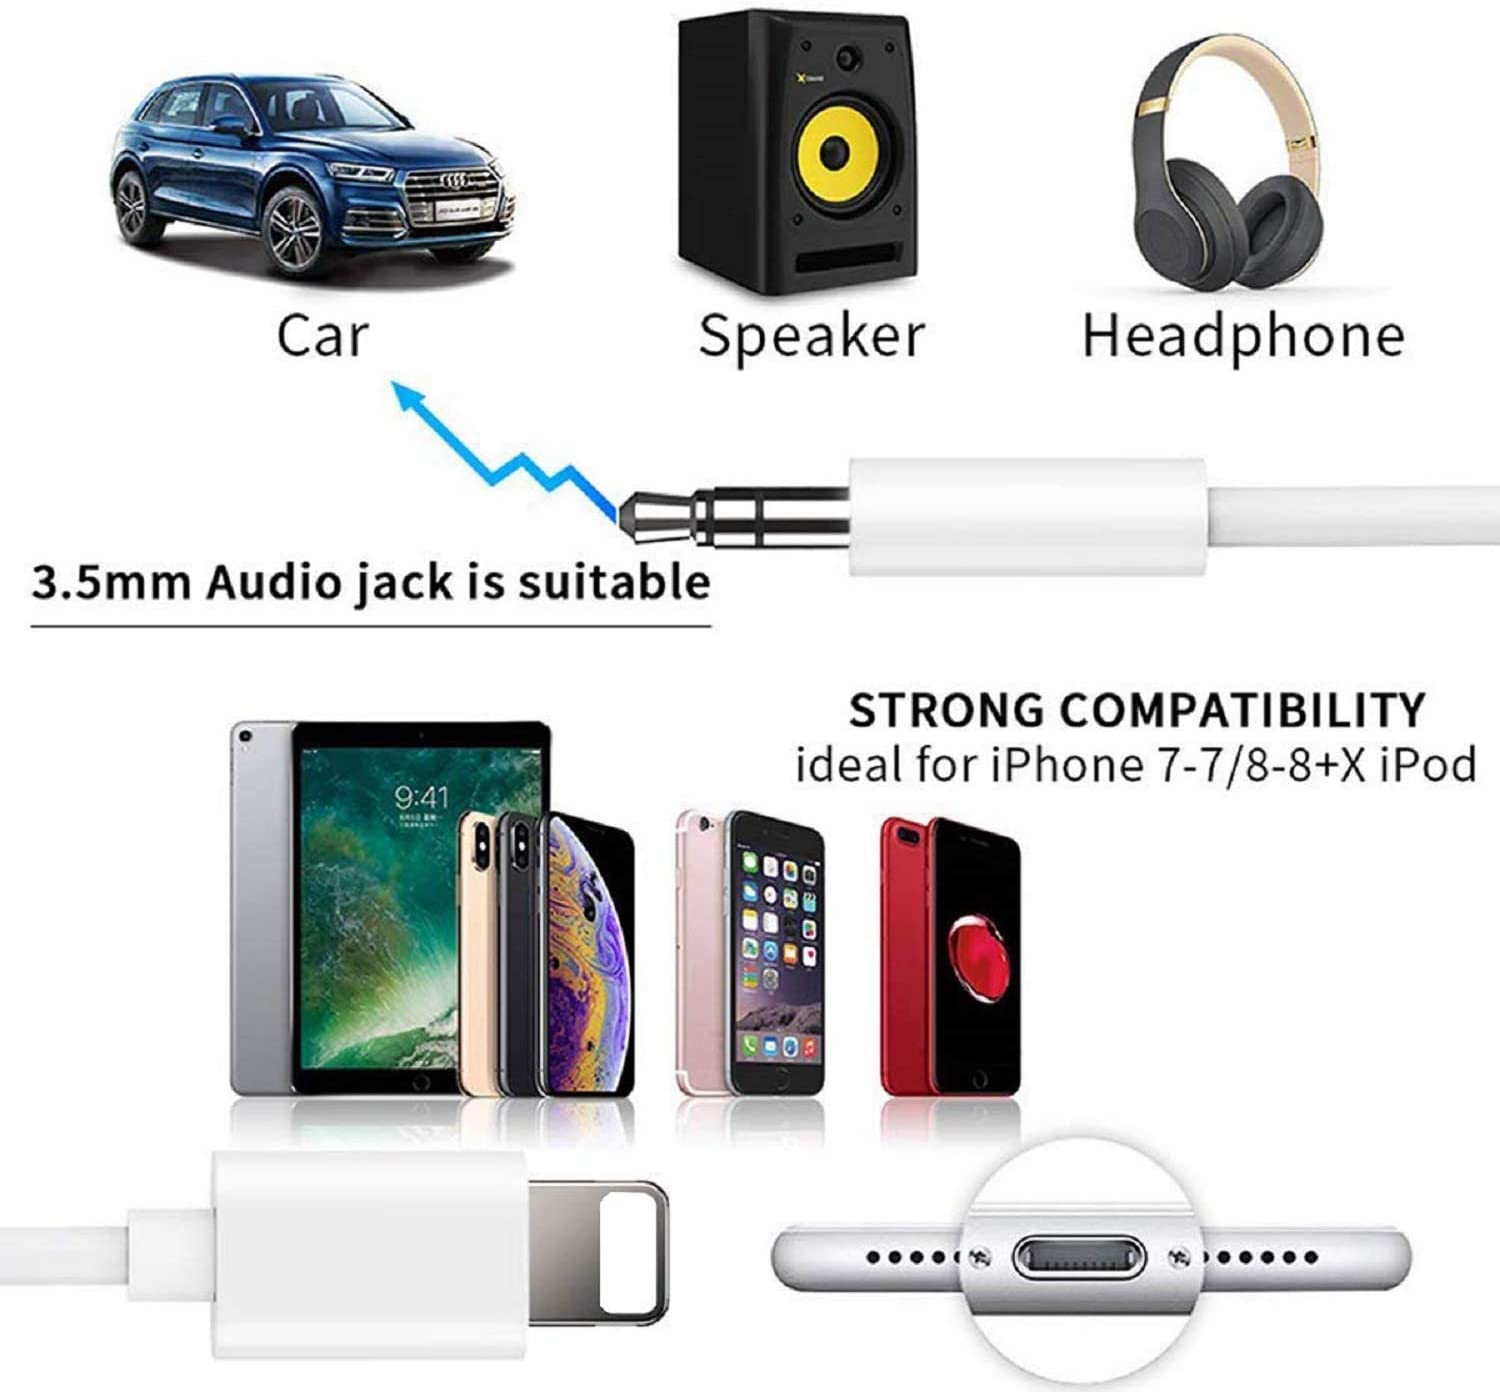 [Apple MFi Certified] AUX Cord for iPhone 11, Lightning to 3.5 mm Headphone Jack Adapter, 3.5mm to Lightning Adapter, Aux Adapter, Headphone Jack Adapter, Compatible for iPhone 11 XS XR X 7 7P 8 8P - image 3 of 9